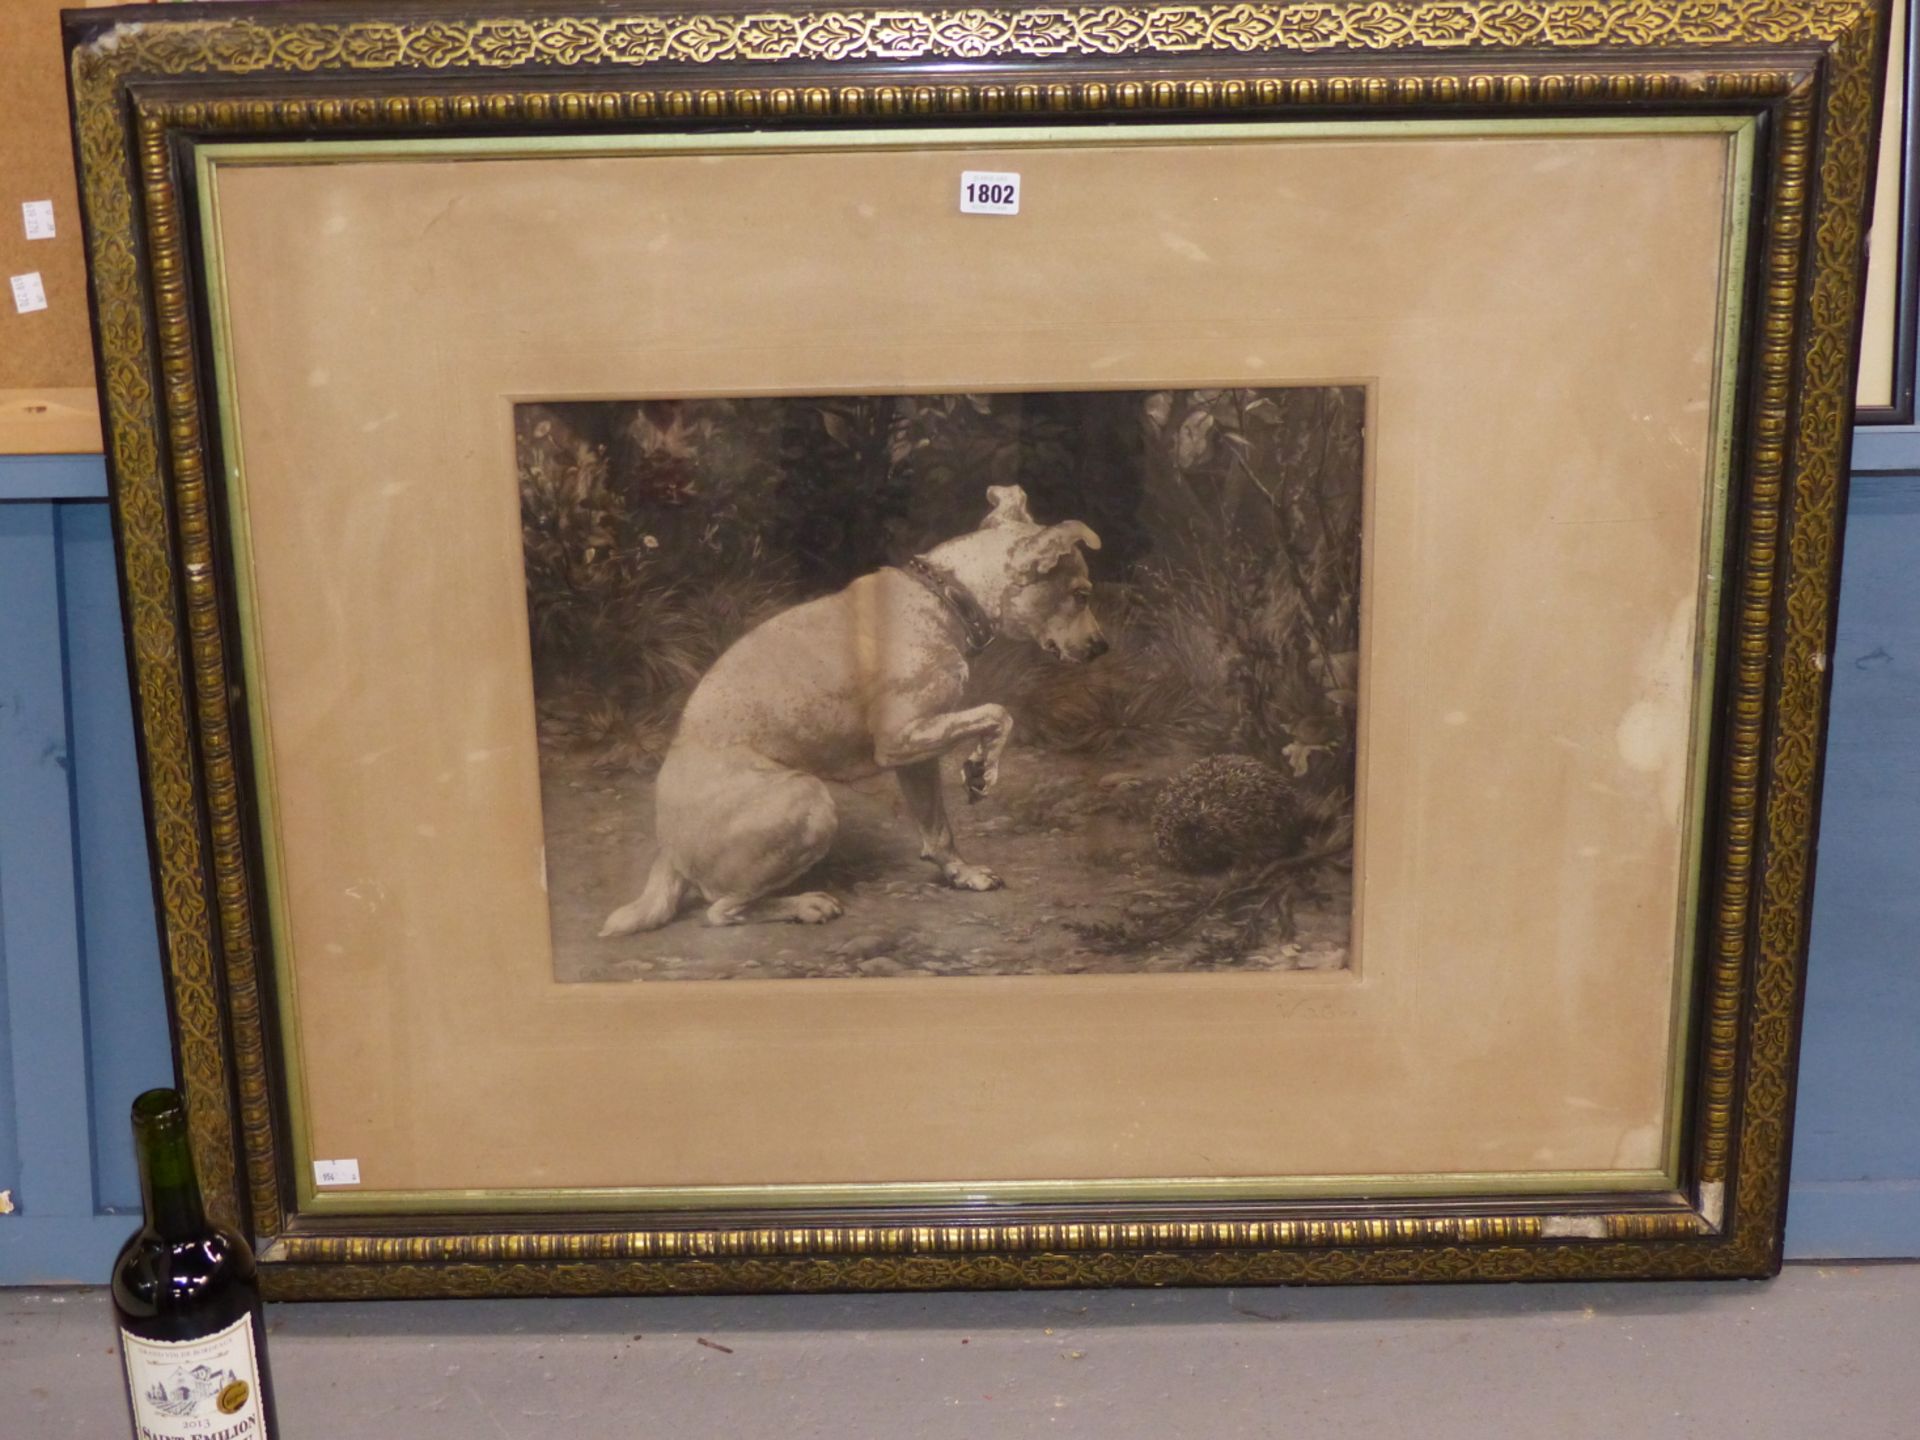 AFTER GEORGE HOLMES (19TH CENTURY), A TERRIER INVESTIGATING A HEDGEHOG, ENGRAVING, 46 X 35CM IN - Image 4 of 4